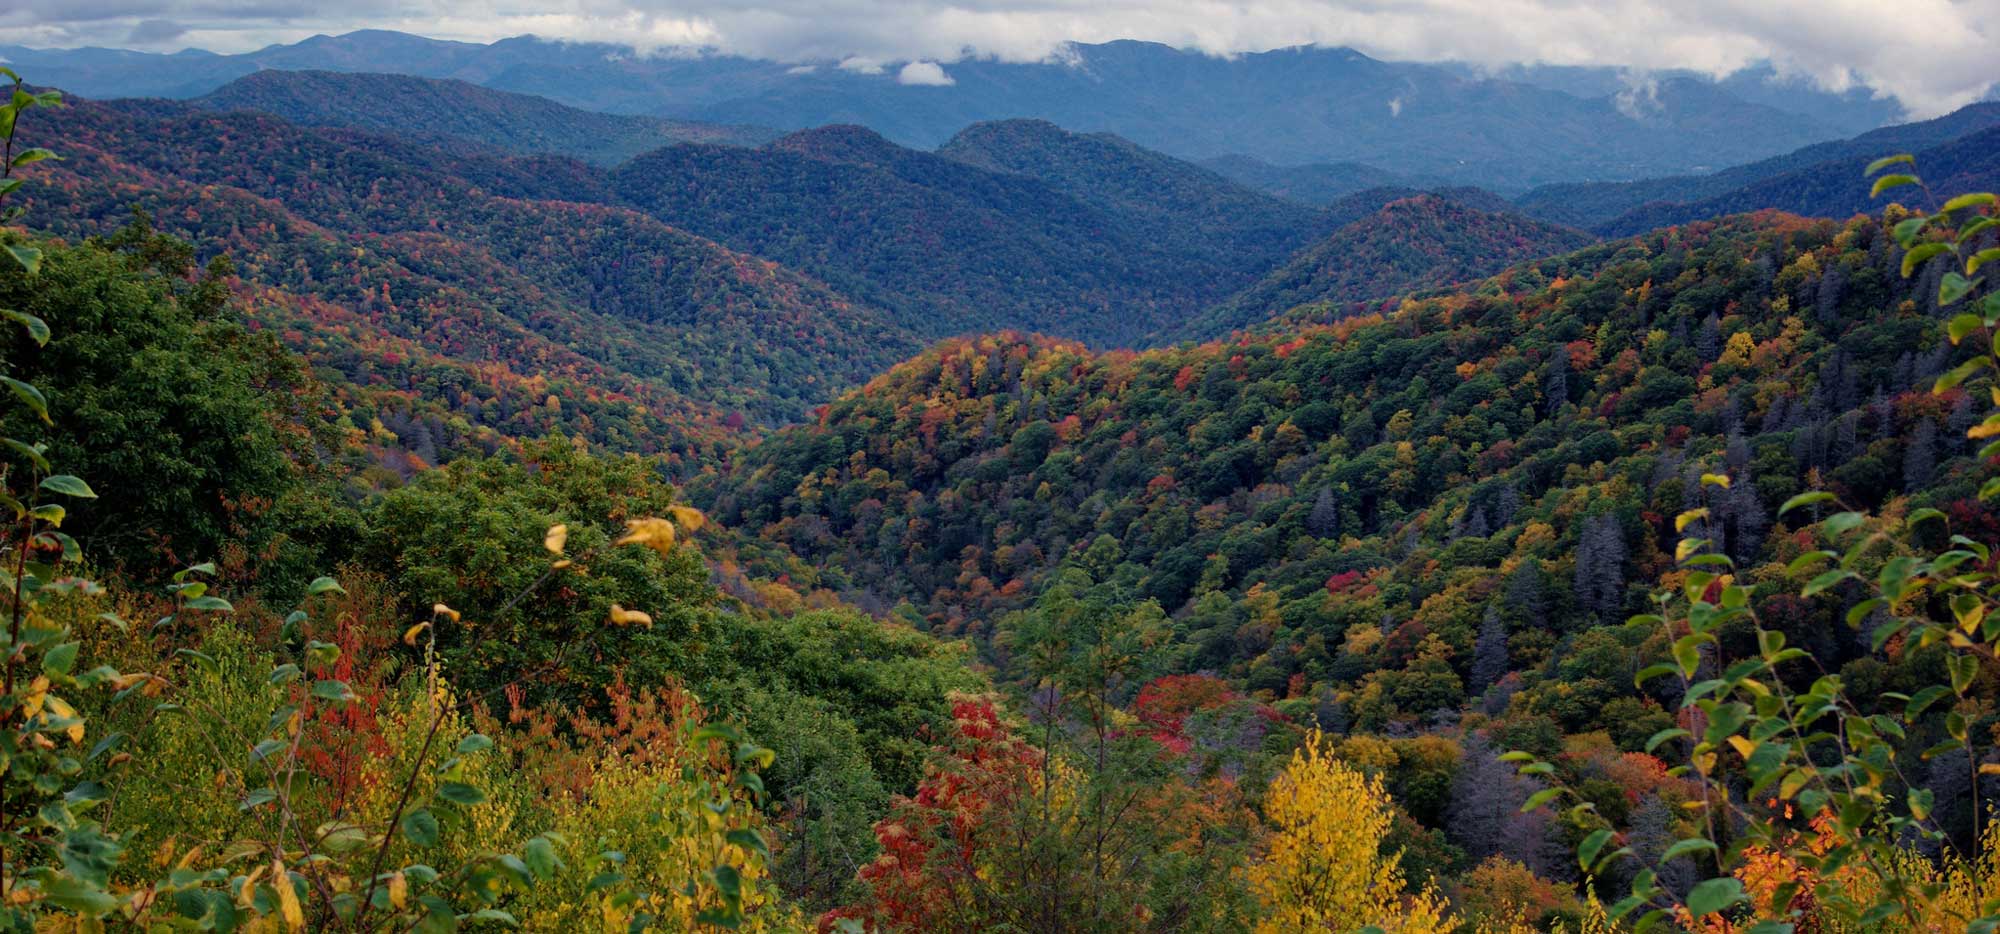 Photograph of ridges and v-shaped valleys in Great Smoky Mountains National Park.